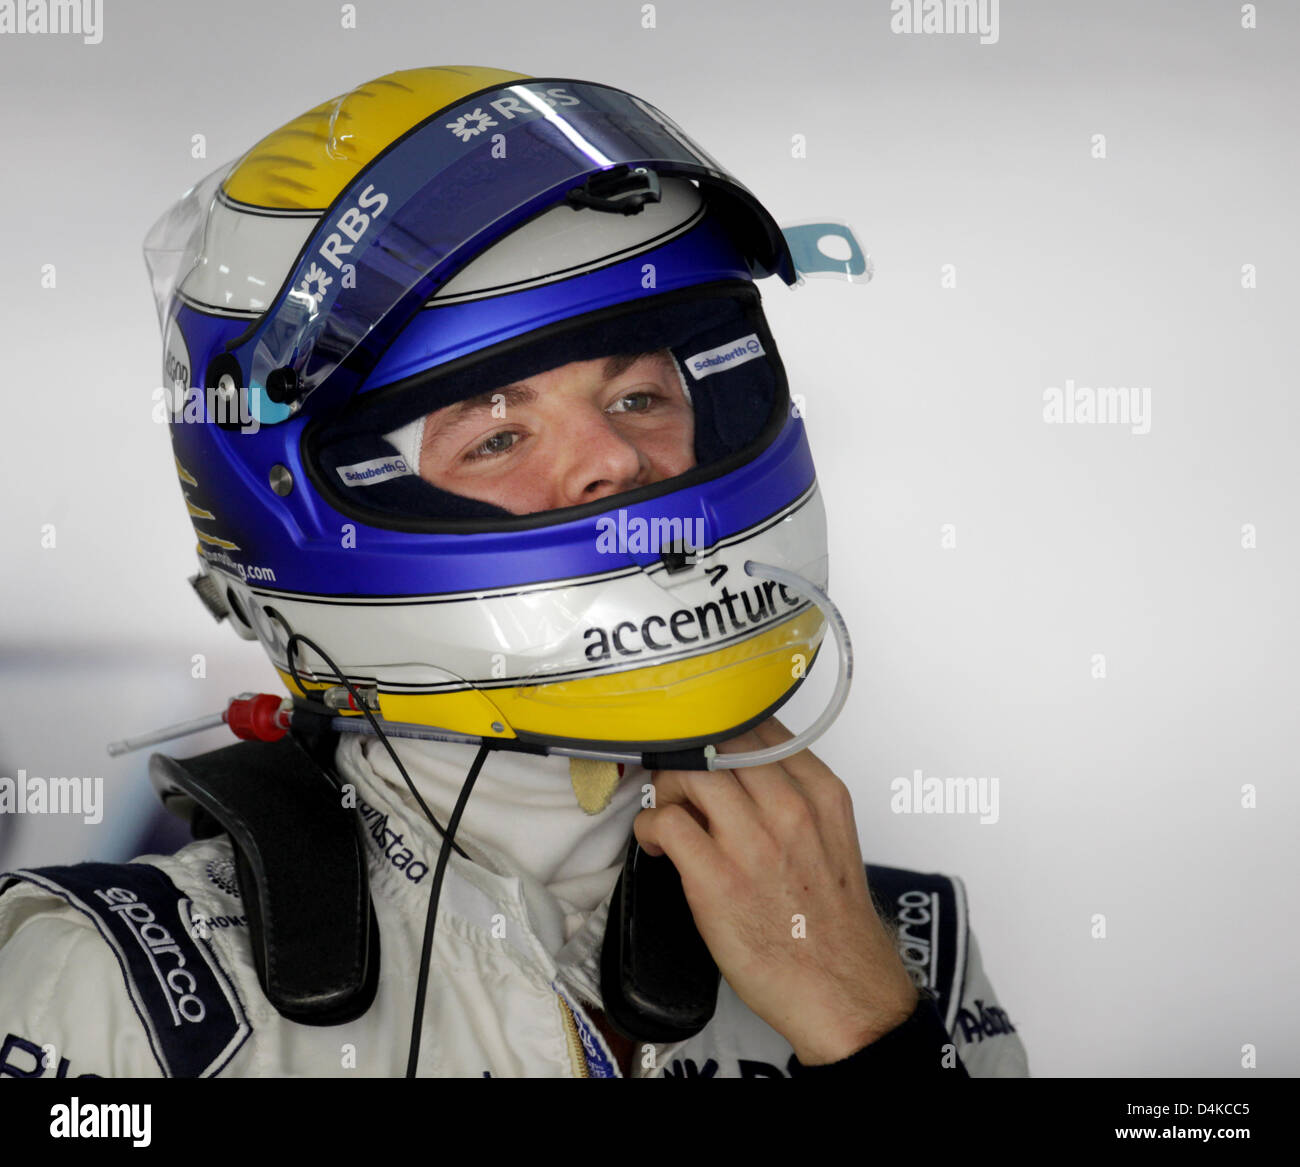 German Formula One driver Nico Rosberg of Williams F1 adjusts his helmet  during the first practice session at Bahrain International Circuit in  Sakhir, Bahrain, 24 April 2009. Hamilton finished first in the